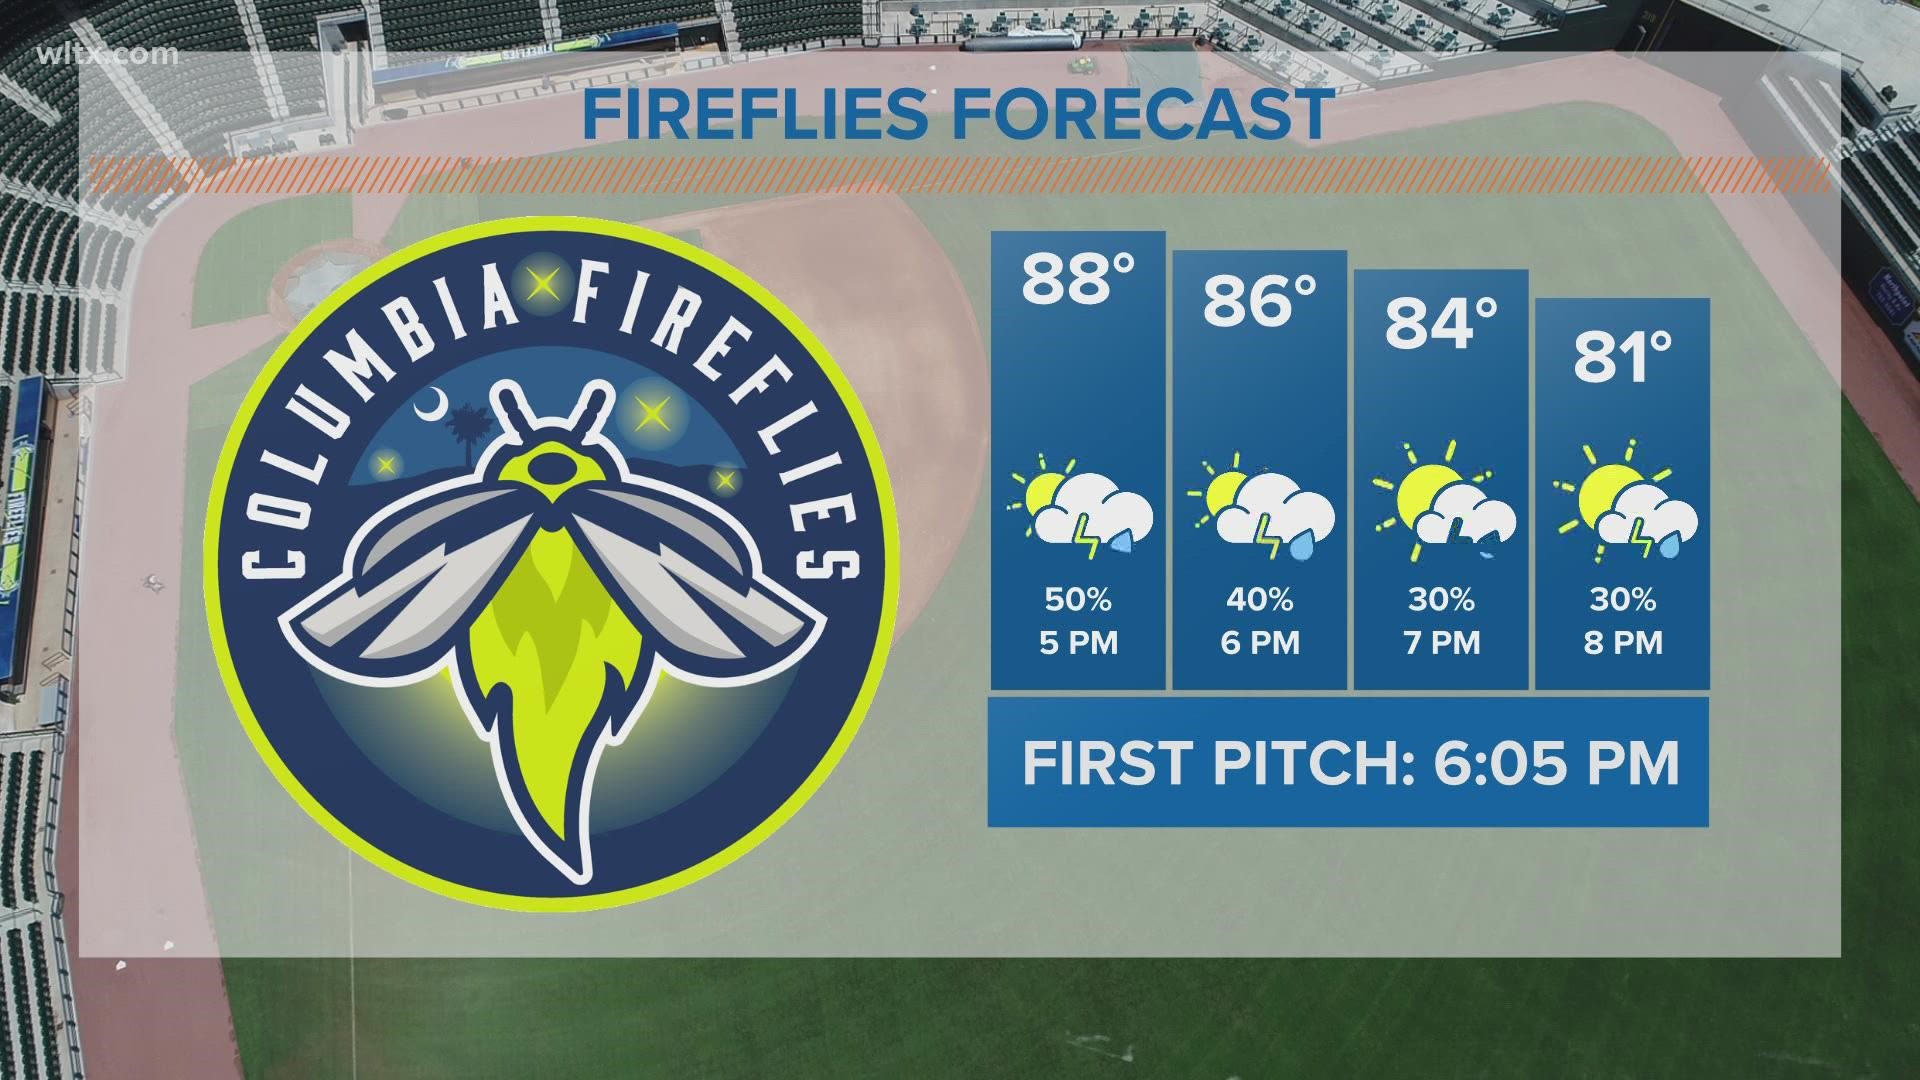 Here's the weather forecast for the Columbia Fireflies game for July 4, 2022.